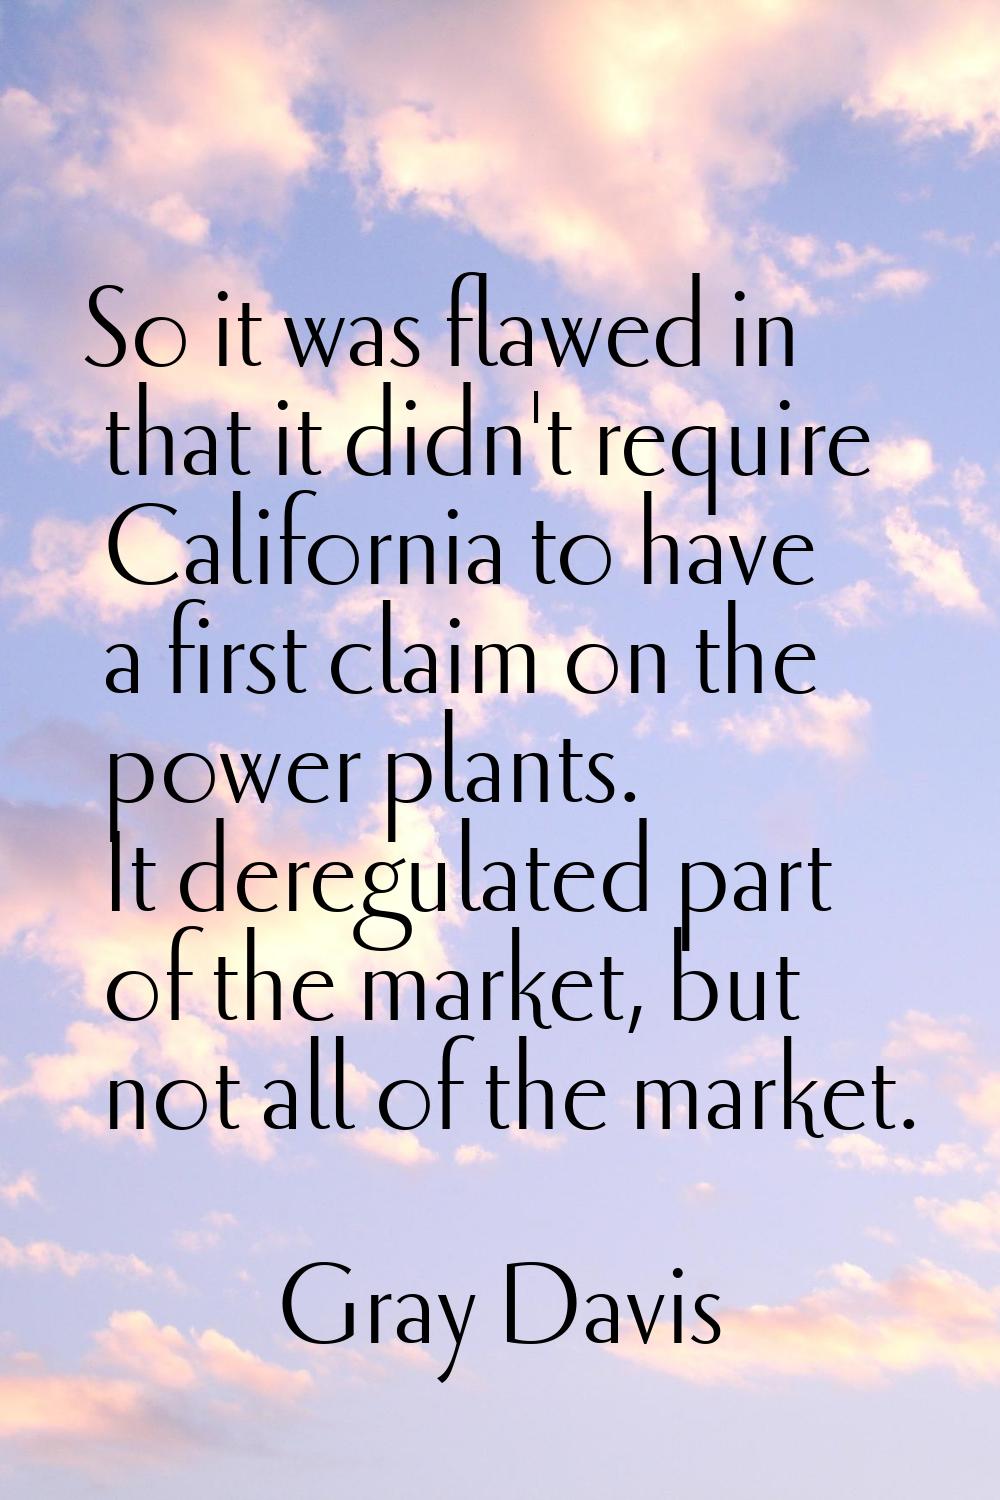 So it was flawed in that it didn't require California to have a first claim on the power plants. It